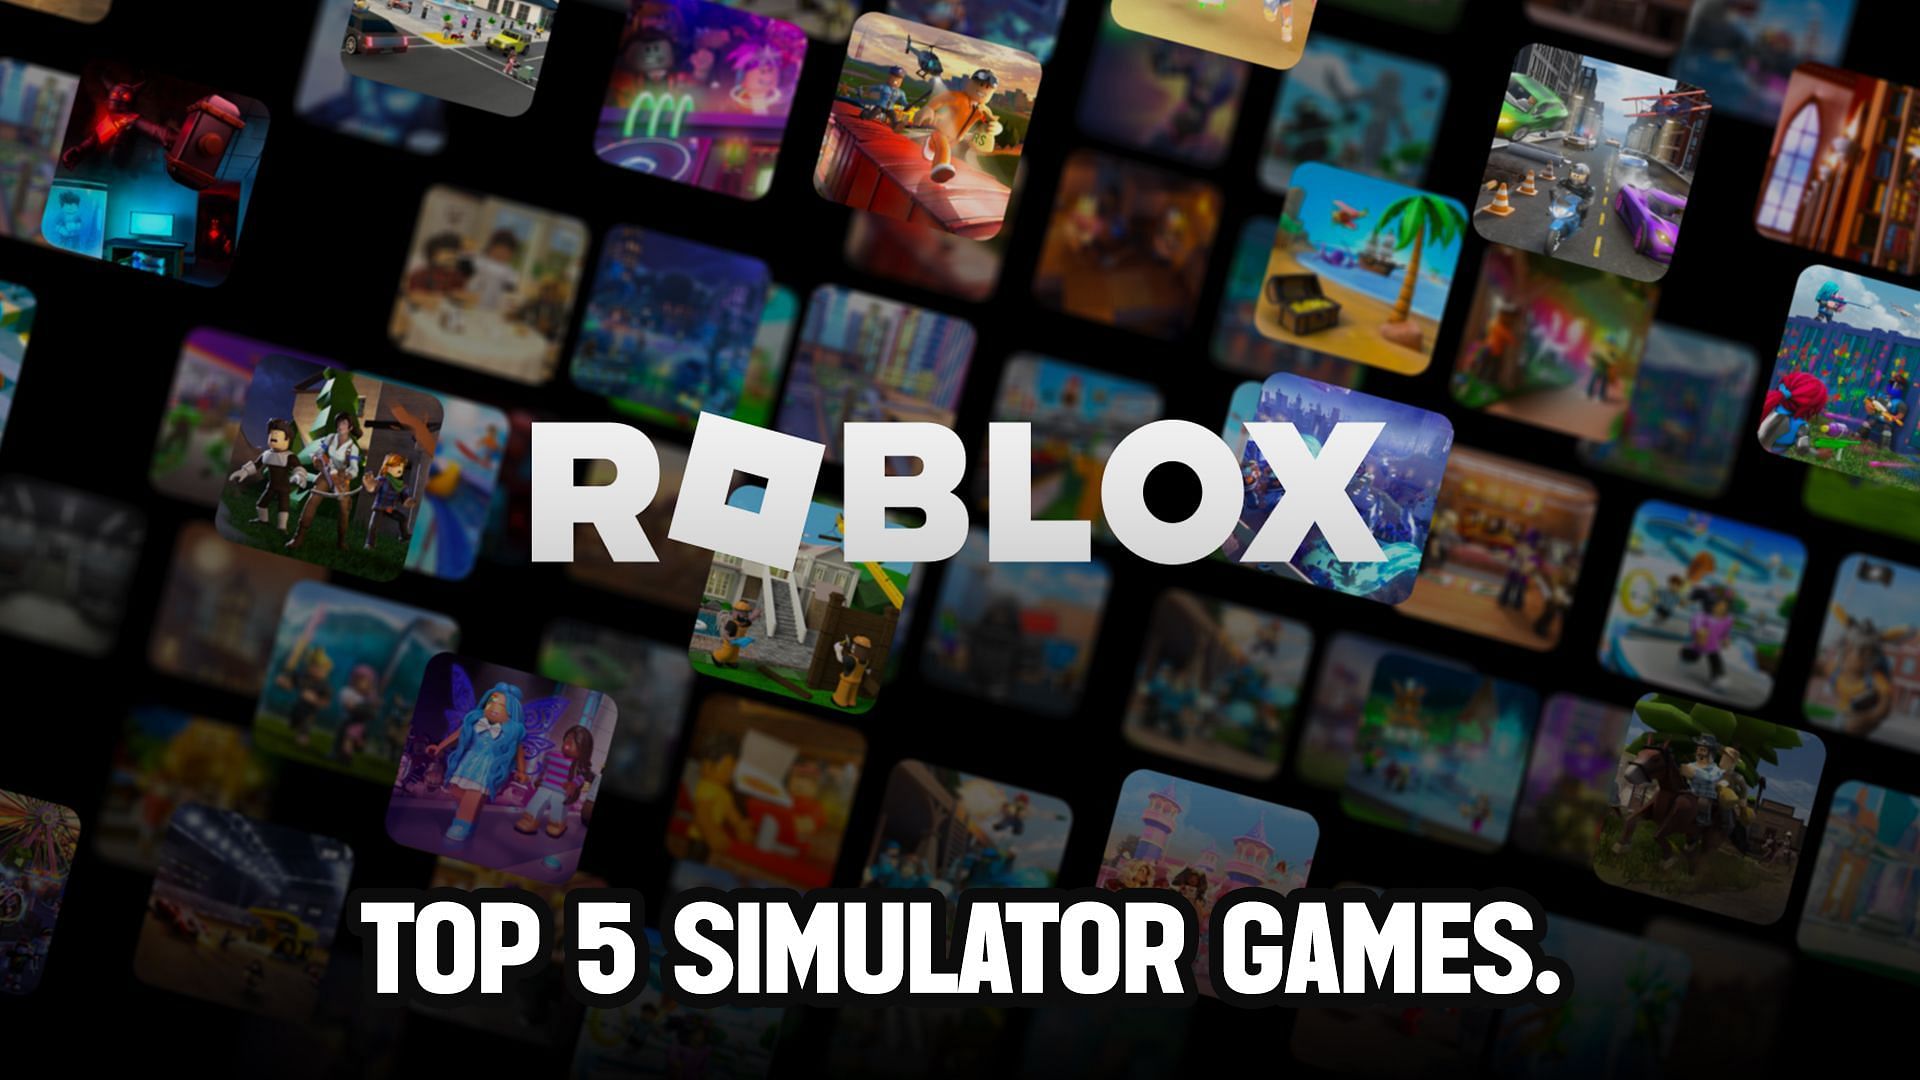 Roblox Is Already Tangling with Call of Duty, Fortnite as the Most